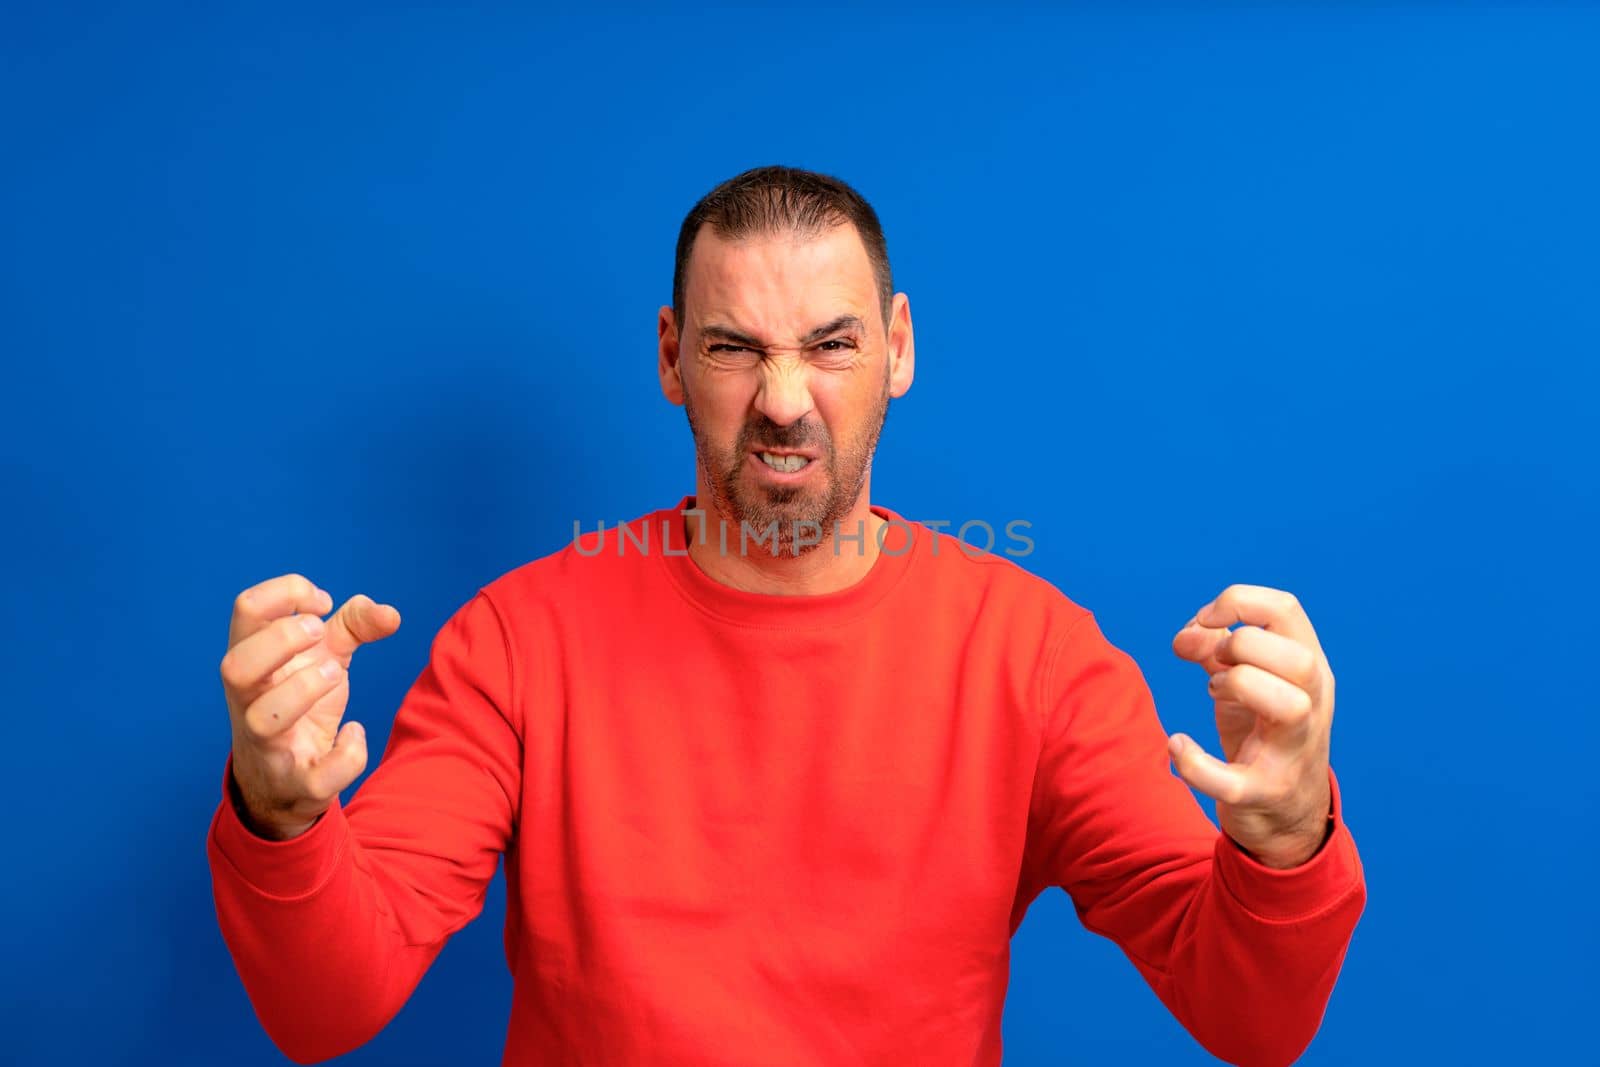 Hispanic man with beard standing over blue isolated background in aggressive and furious attitude with raised hands in the shape of claws